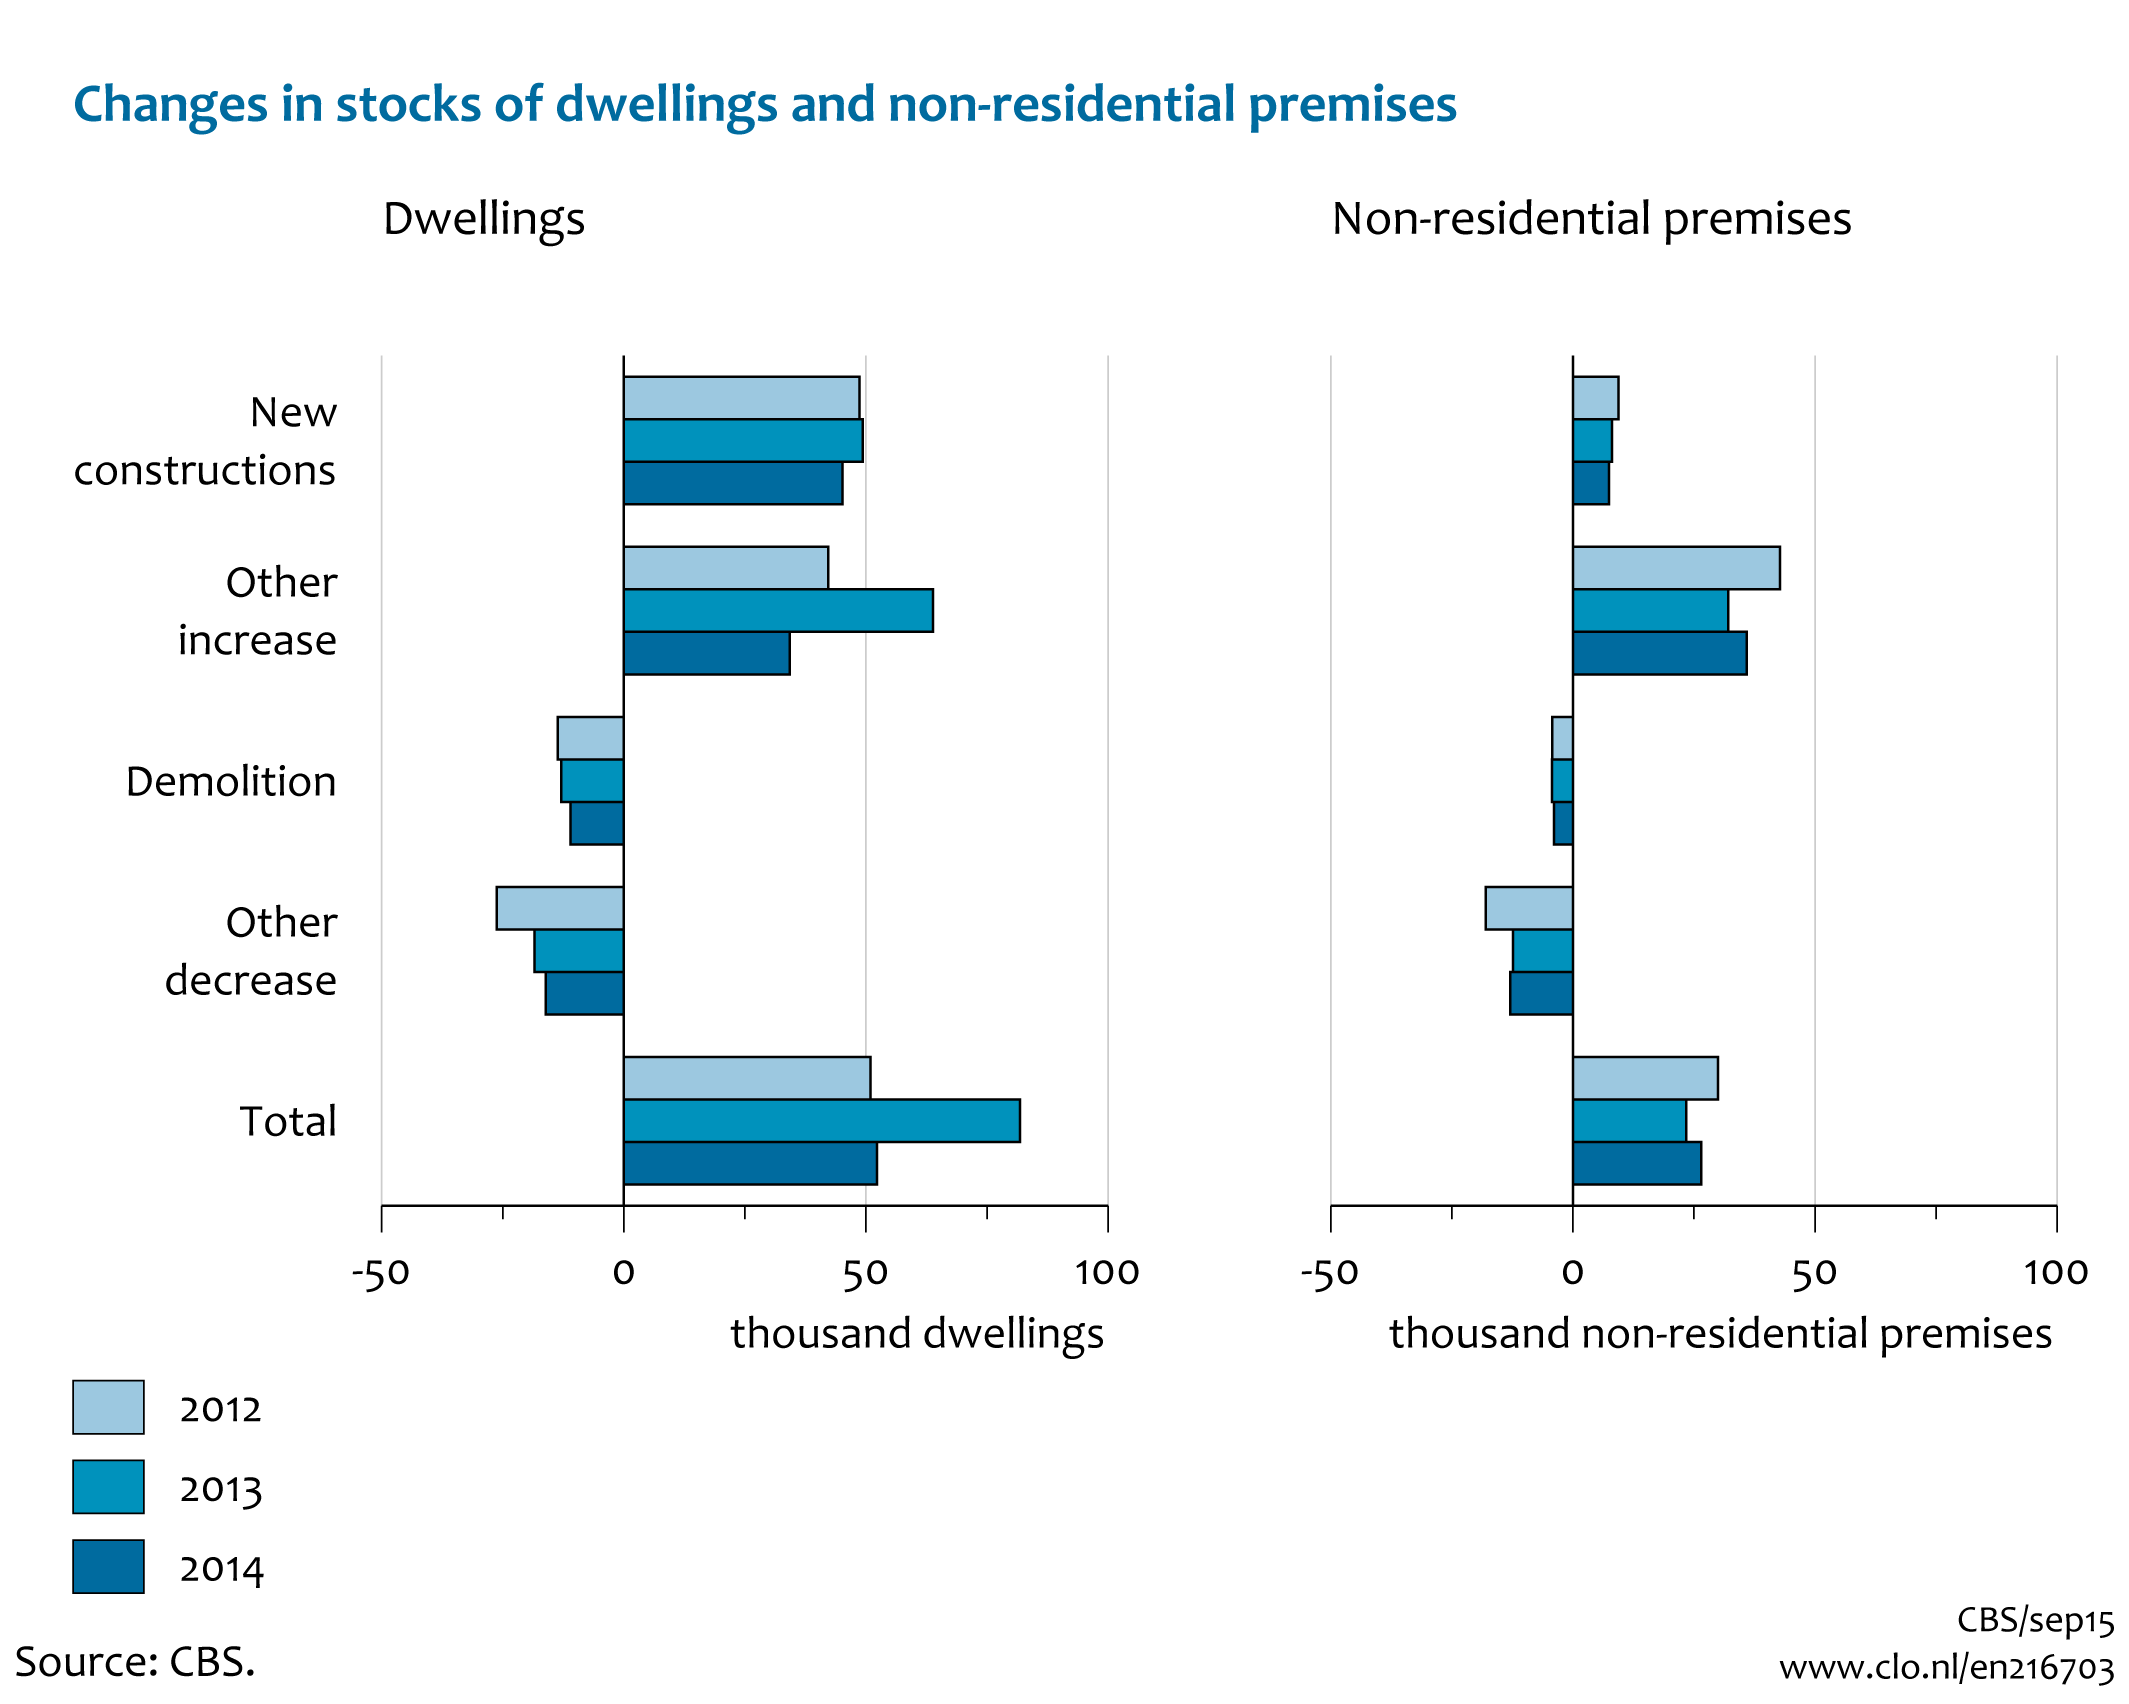 Image Changes in stocks of dwellings and non-residential premises, 2012-2014. The image is further explained in the text.